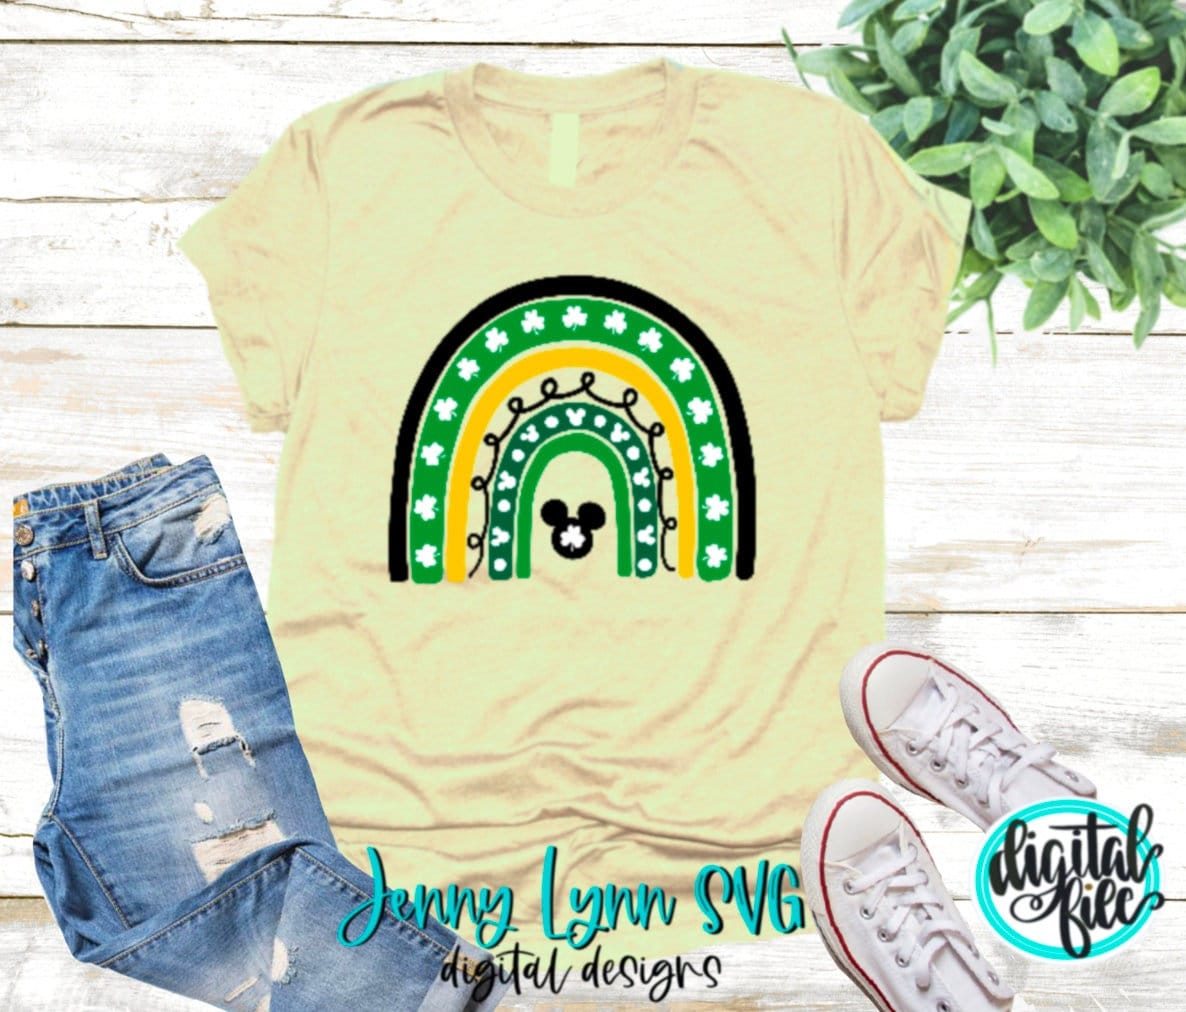 St Patricks Day Rainbow Mickey SVG March SVG PNG Dxf Silhouette Cricut Cut File Mickey dxf Png Clovers Rainbows St Patricks Day Mickey Shirt